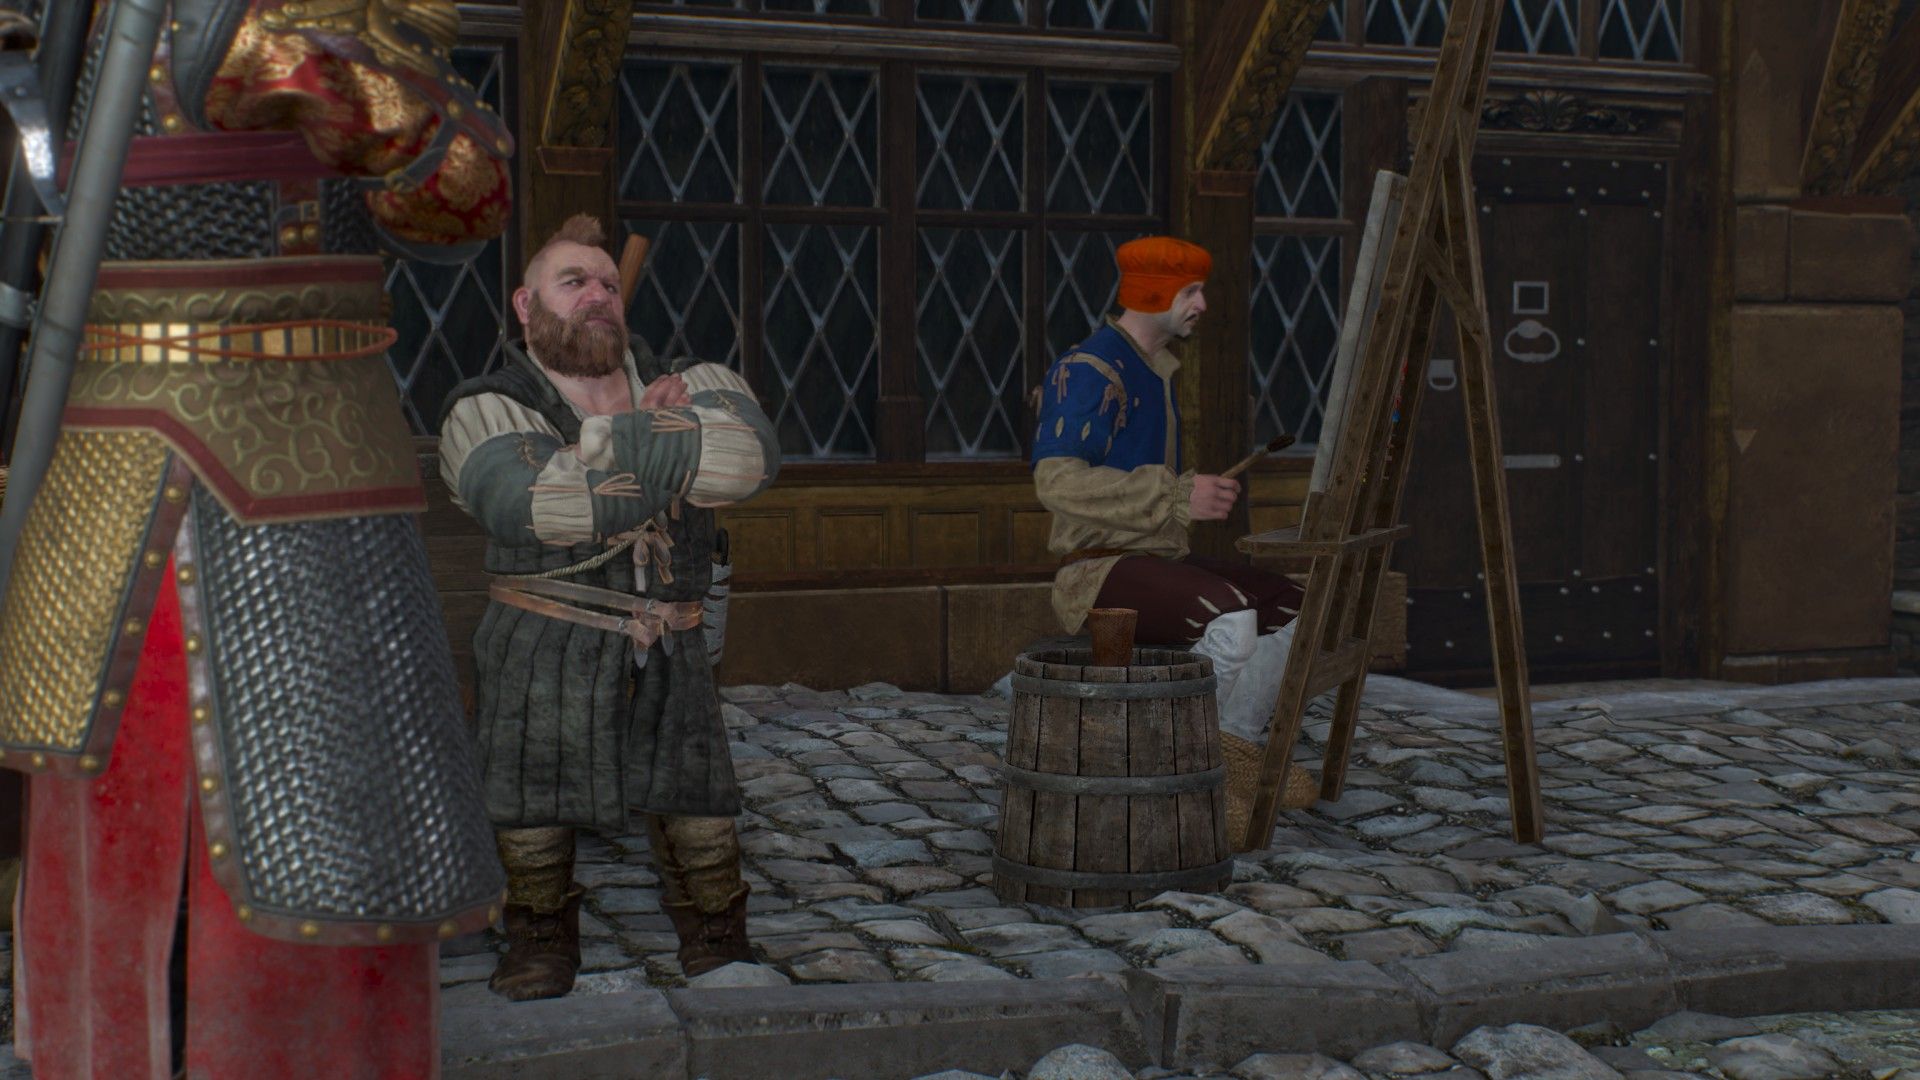 Geralt and Zoltan speak, both crossing their arms, outside a well-decorated townhouse in Novigrad.  A painter in blue clothes and a red cap is in the background.